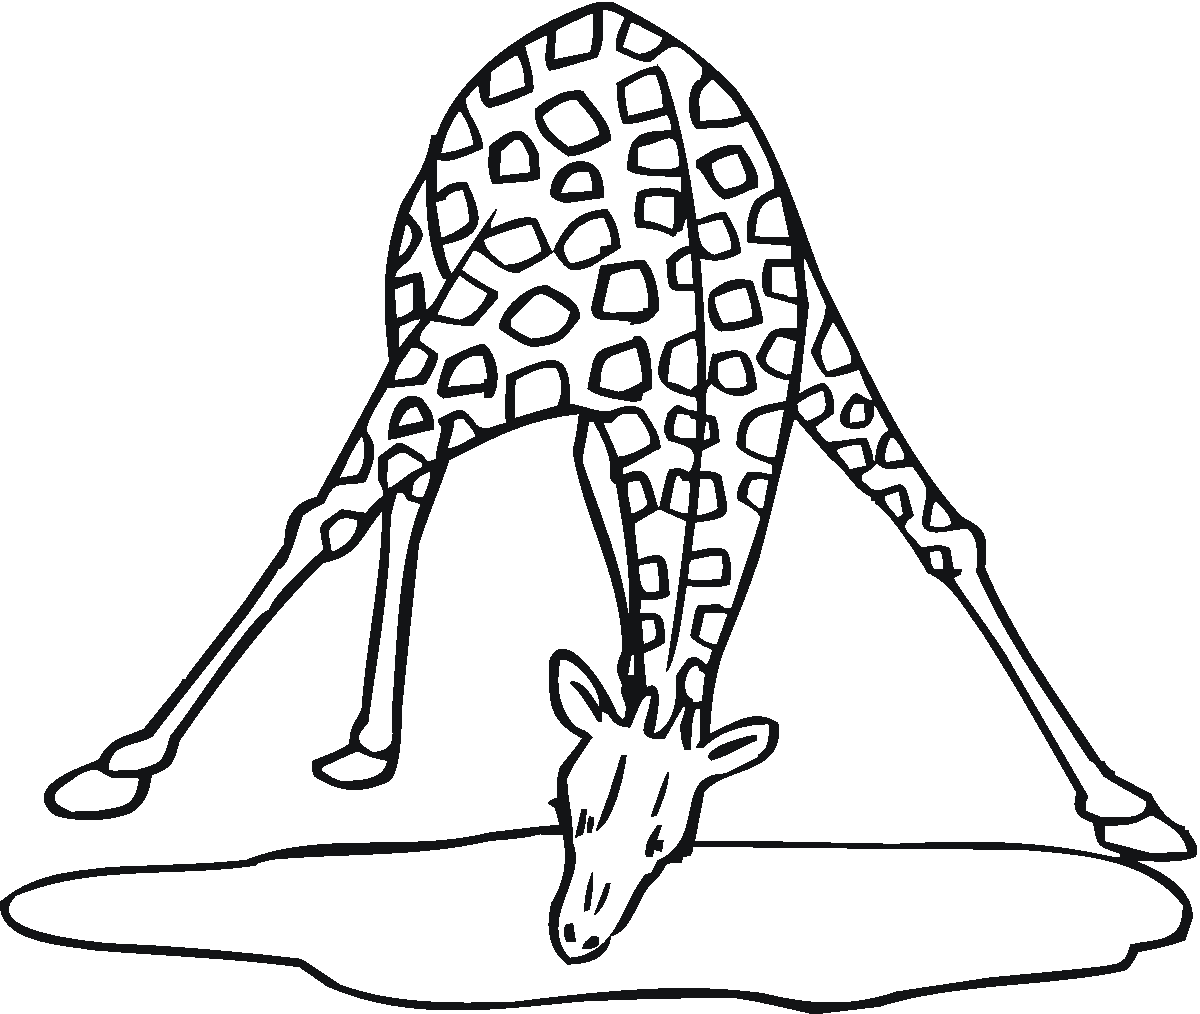 Download Giraffe Coloring Pages To Boost Your Mood - Coloring Home